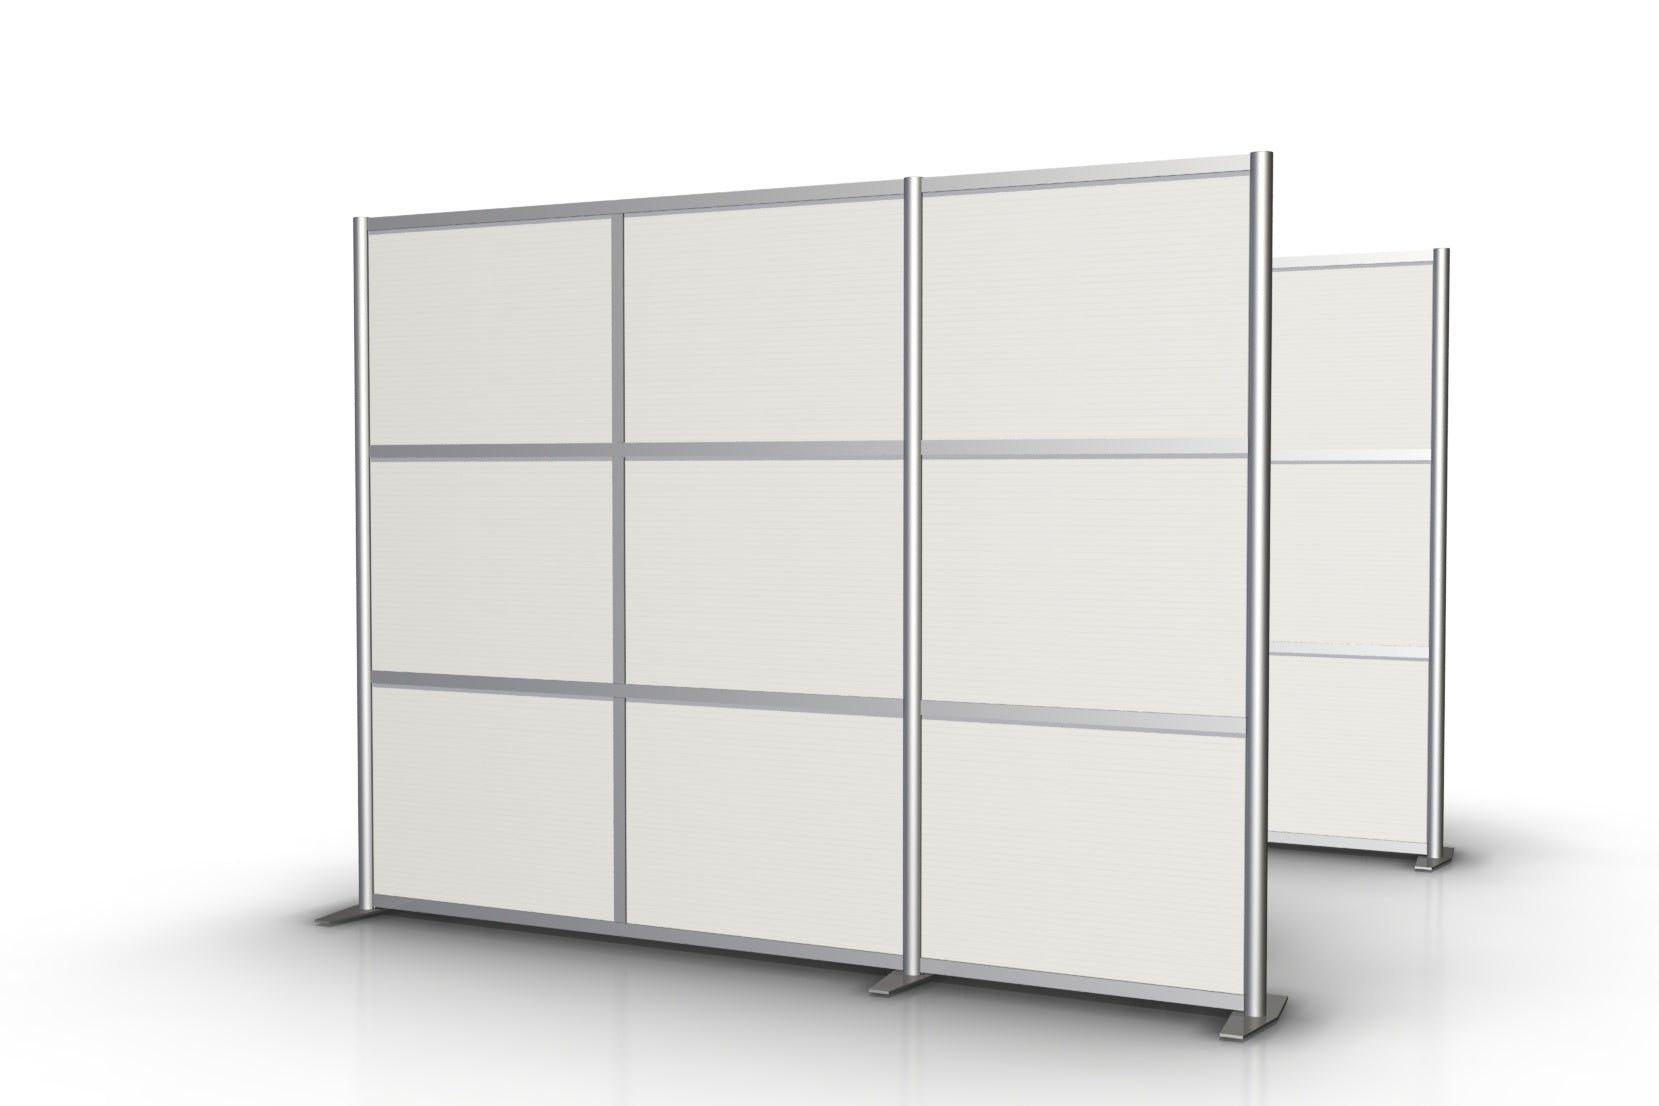 100" wide by 75" tall Modern Office Partition with White Panels